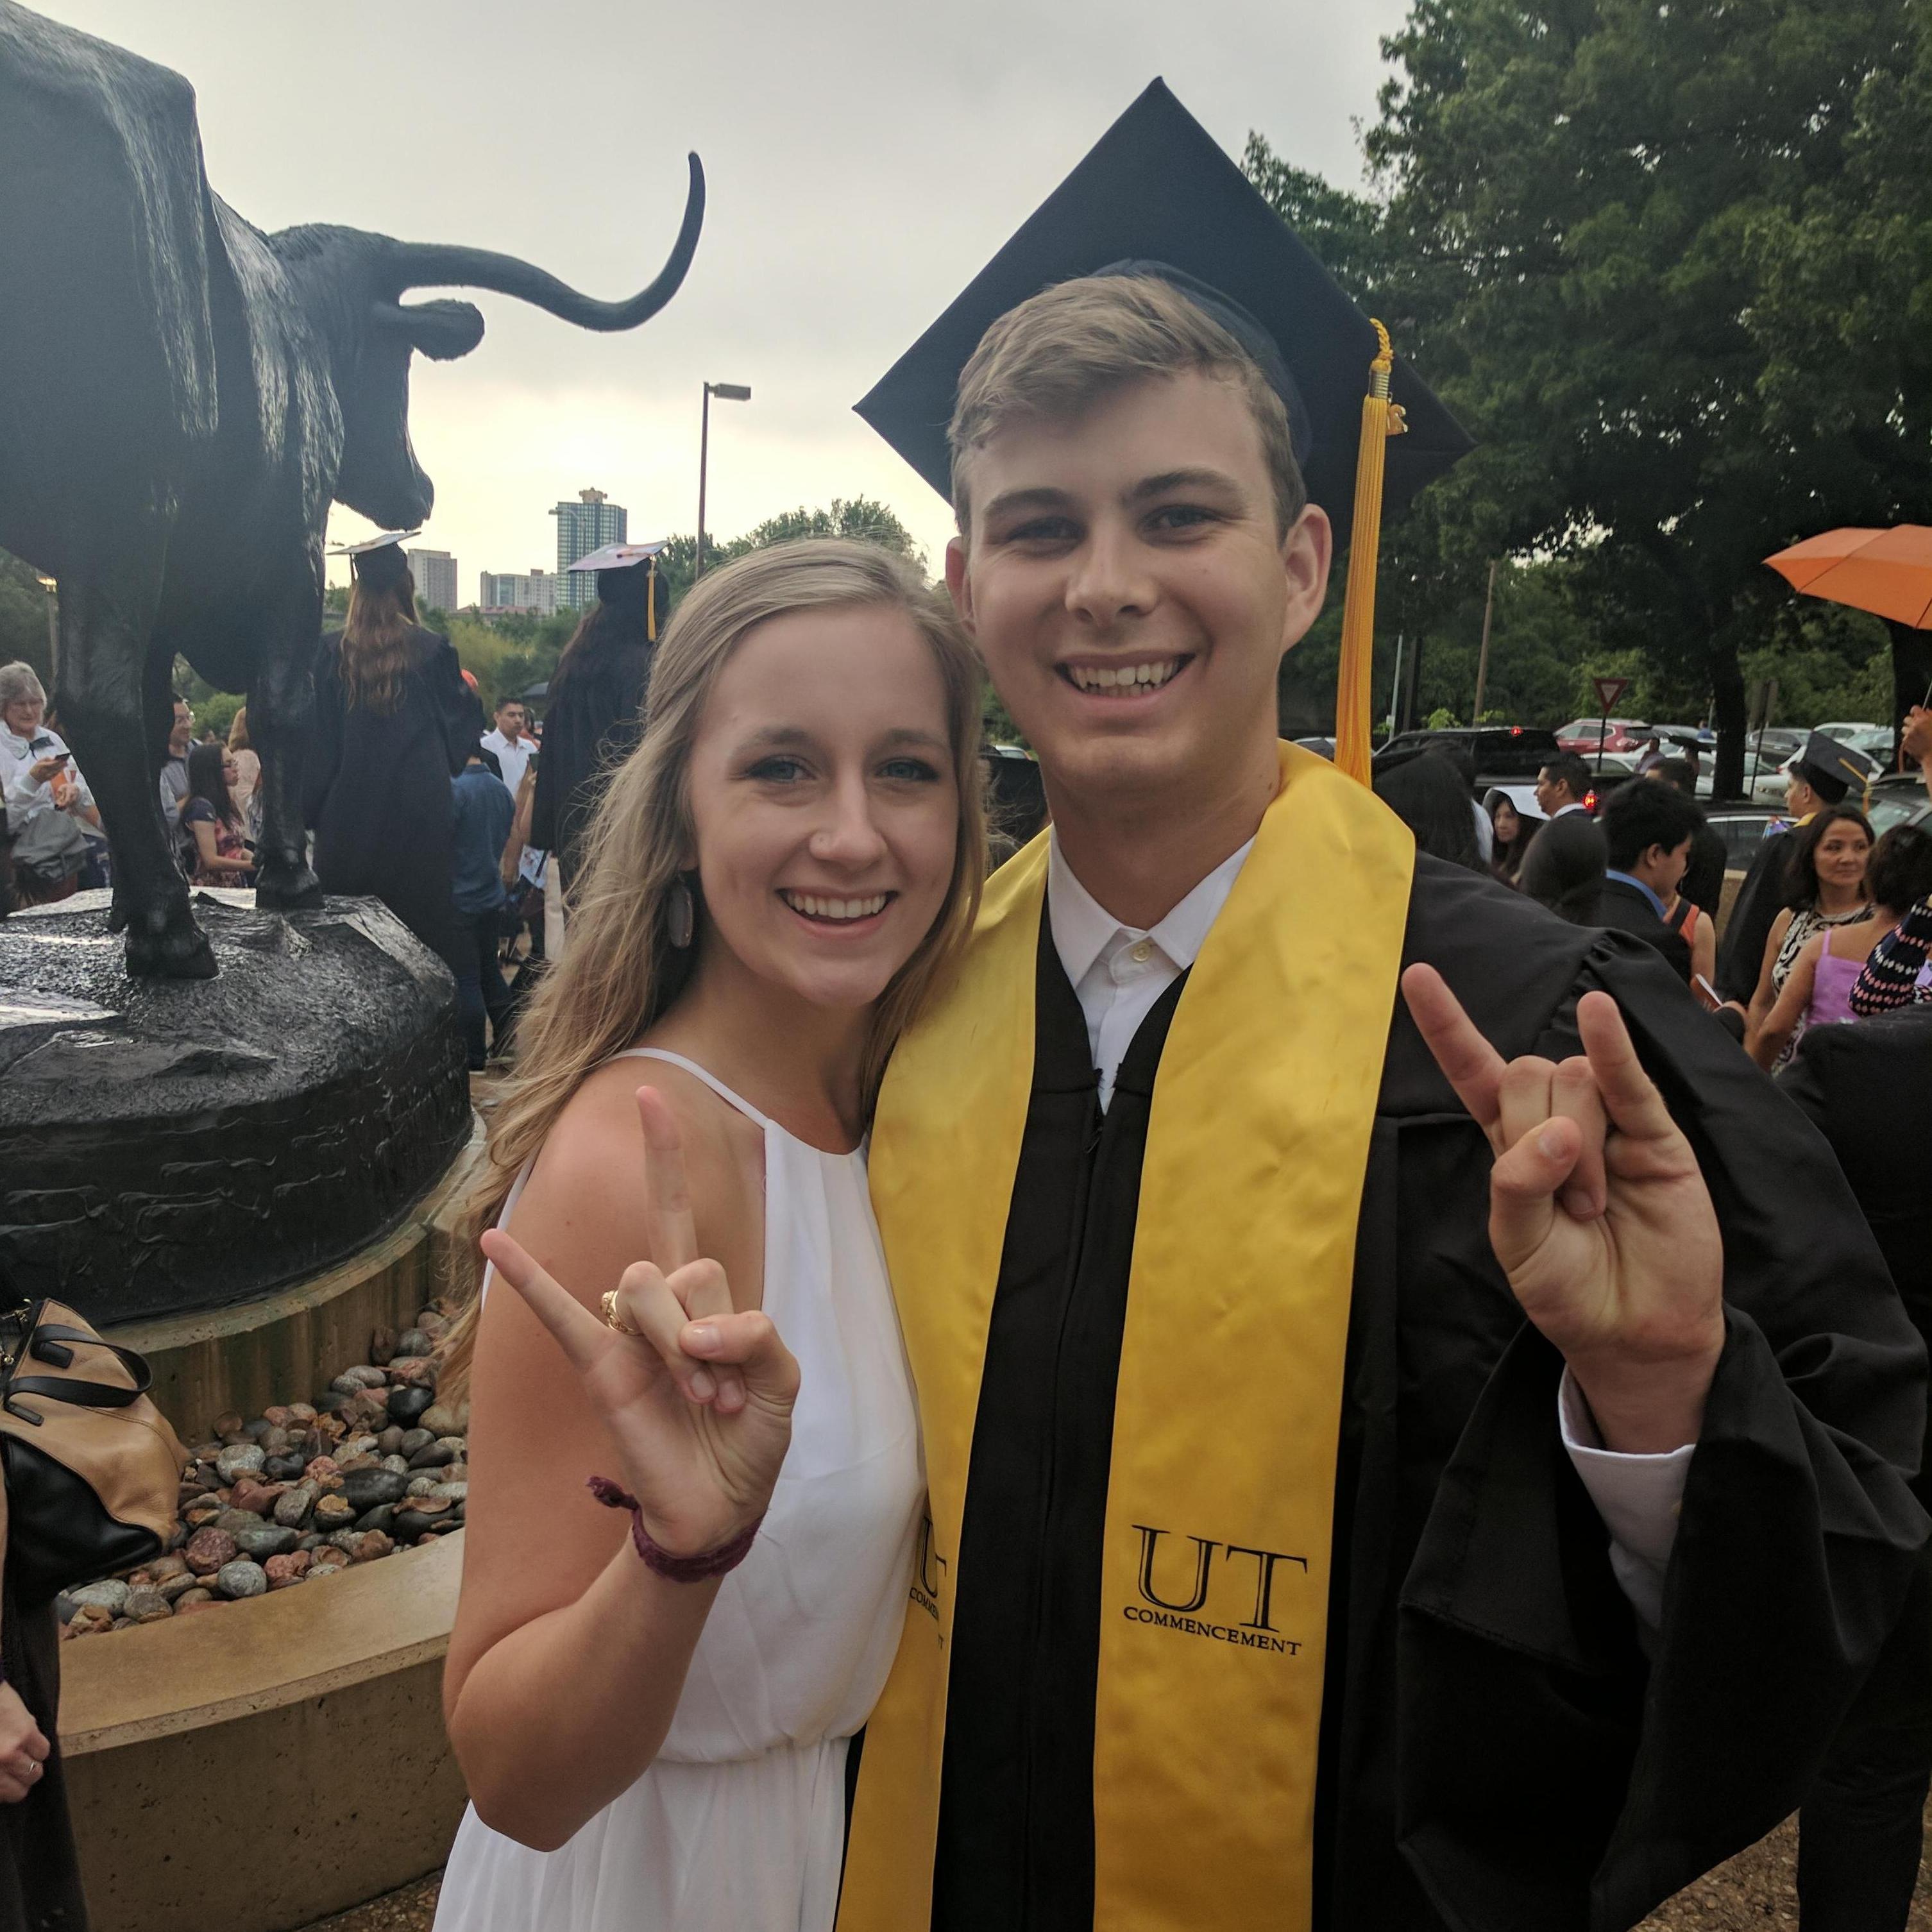 Alec's graduation from The University of Texas \m/